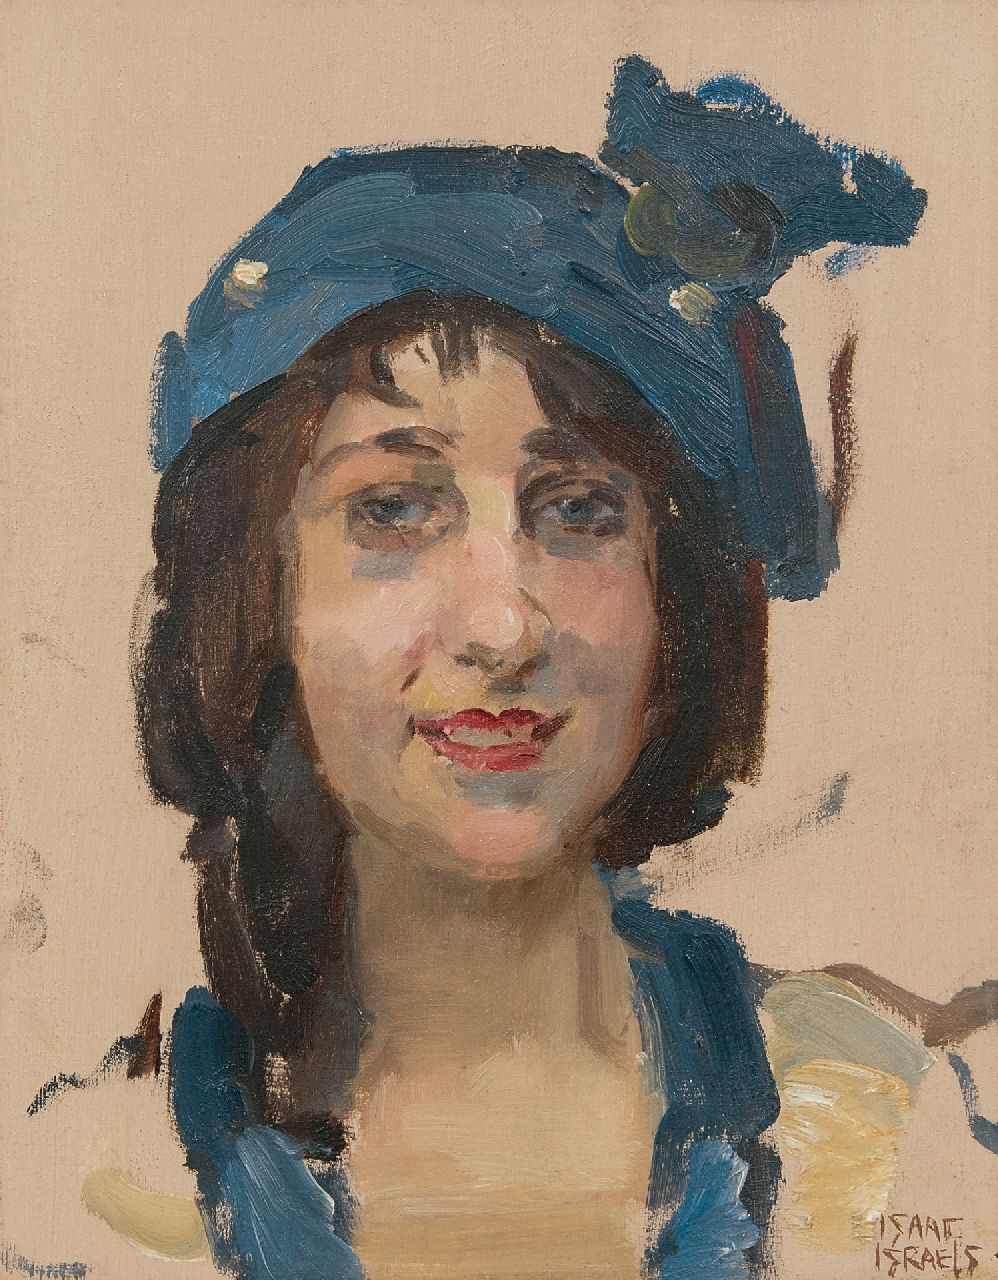 Israels I.L.  | 'Isaac' Lazarus Israels, Smiling young woman, oil on panel 27.0 x 21.3 cm, signed l.r.